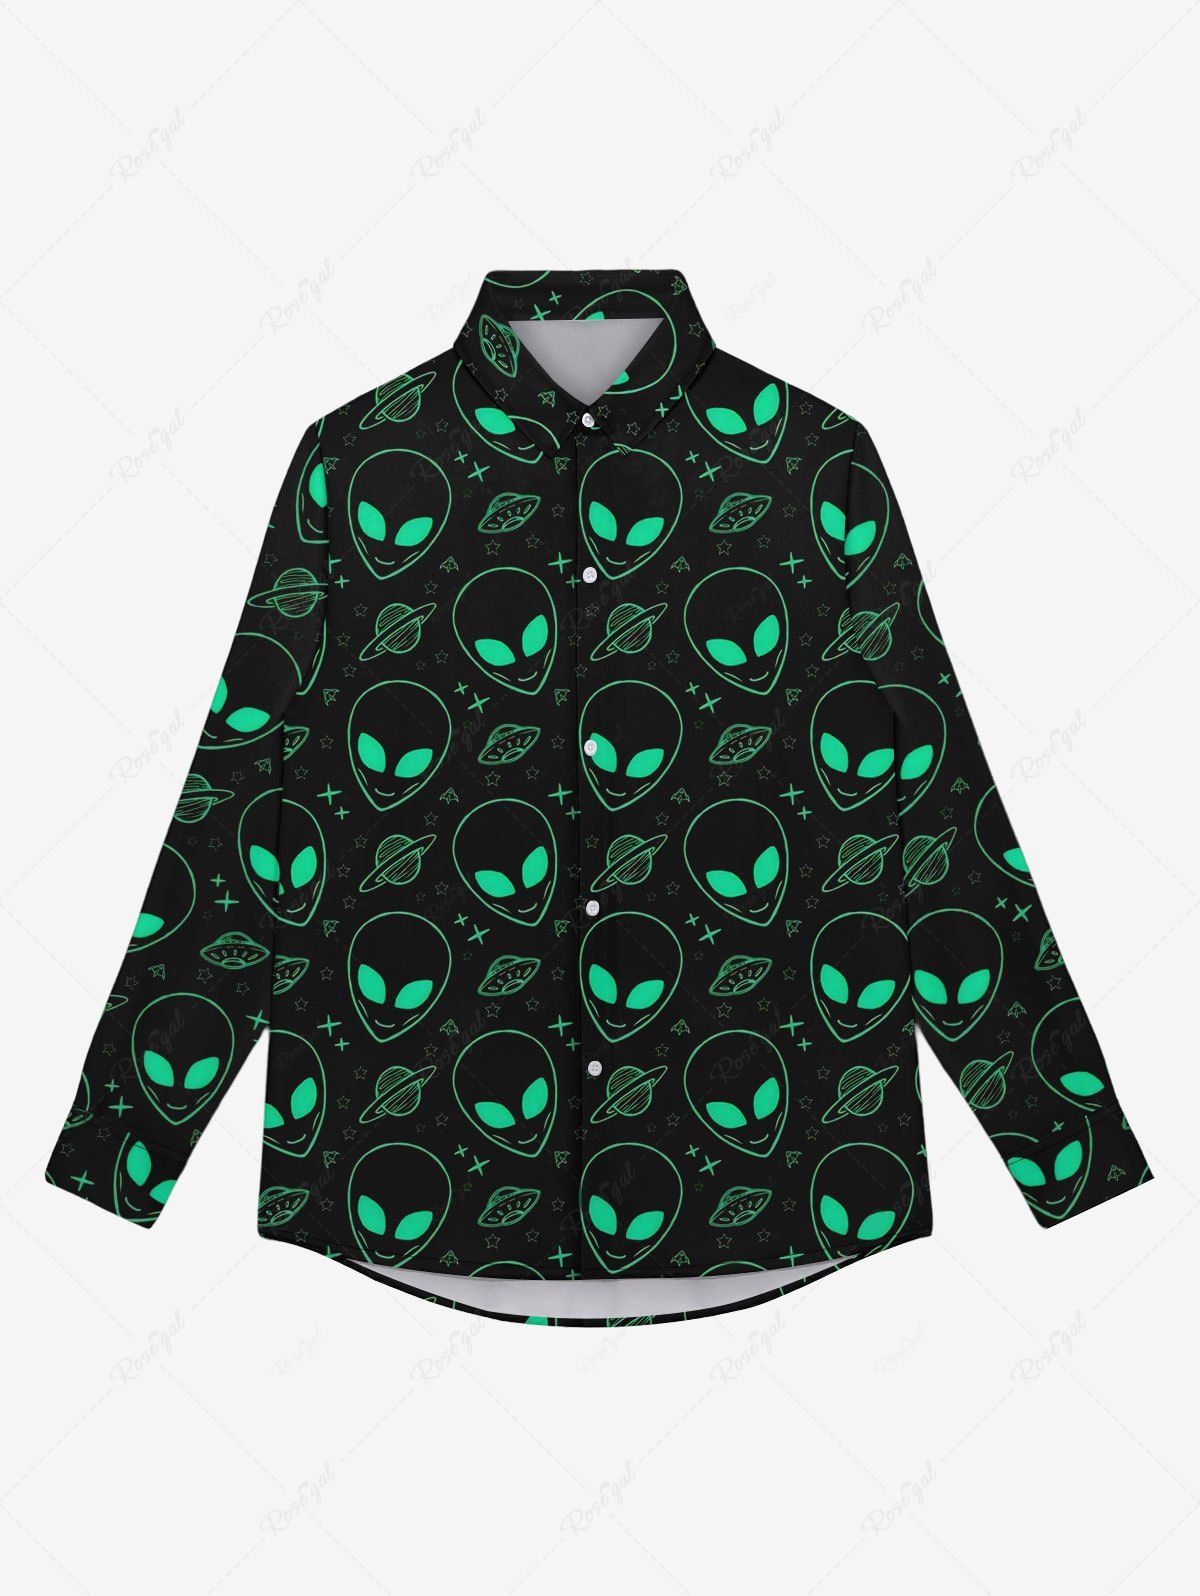 Affordable Gothic Turn-down Collar Alien UFO Planet Print Buttons Shirt For Men  